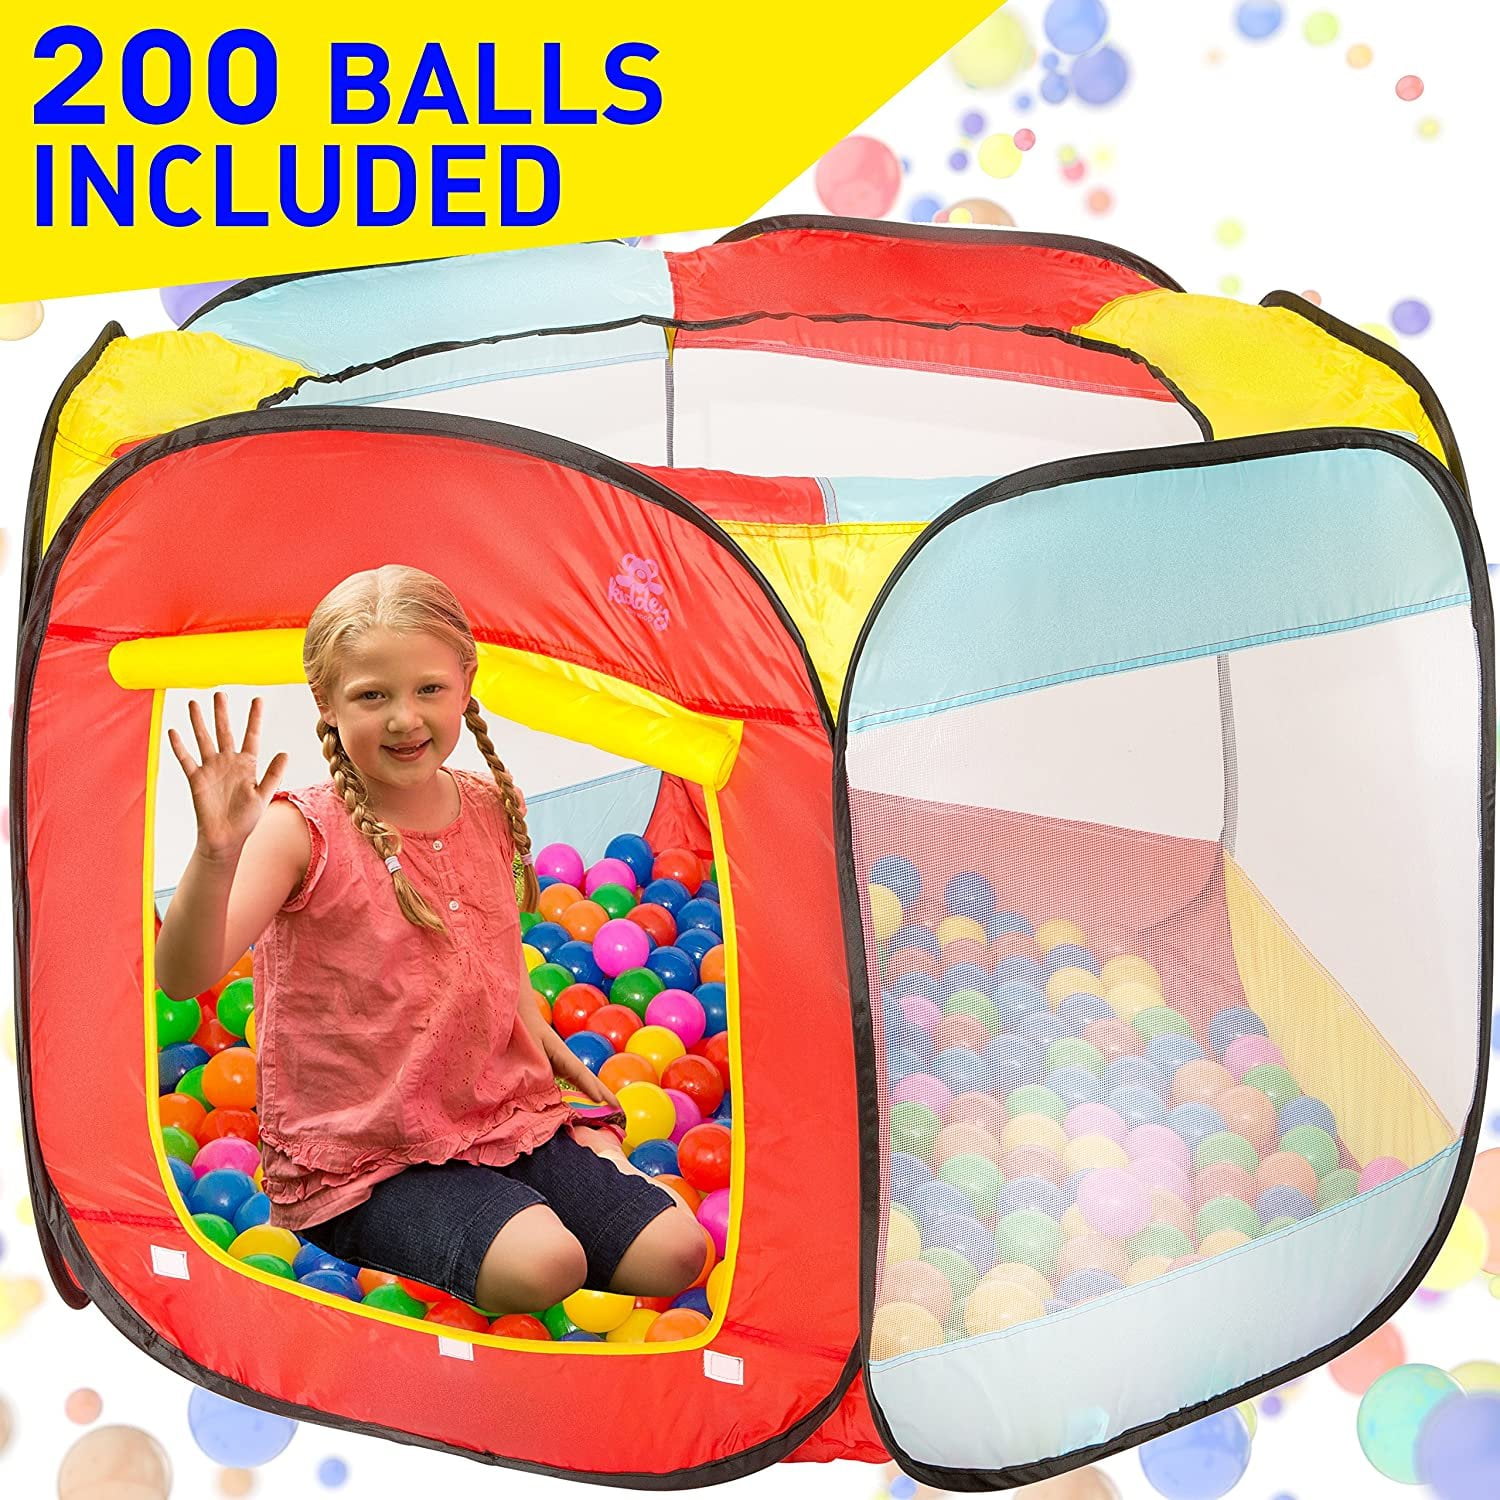 Balls Not Included WASDY 3 in 1 Kids Play Tent Crawl Tunnel Ball Pit with Ball Hoop Ocean Cartoon Pop Up Playhouse Tent Indoor Outdoor Use Kids Toys Gifts for Children Baby Girls Boys